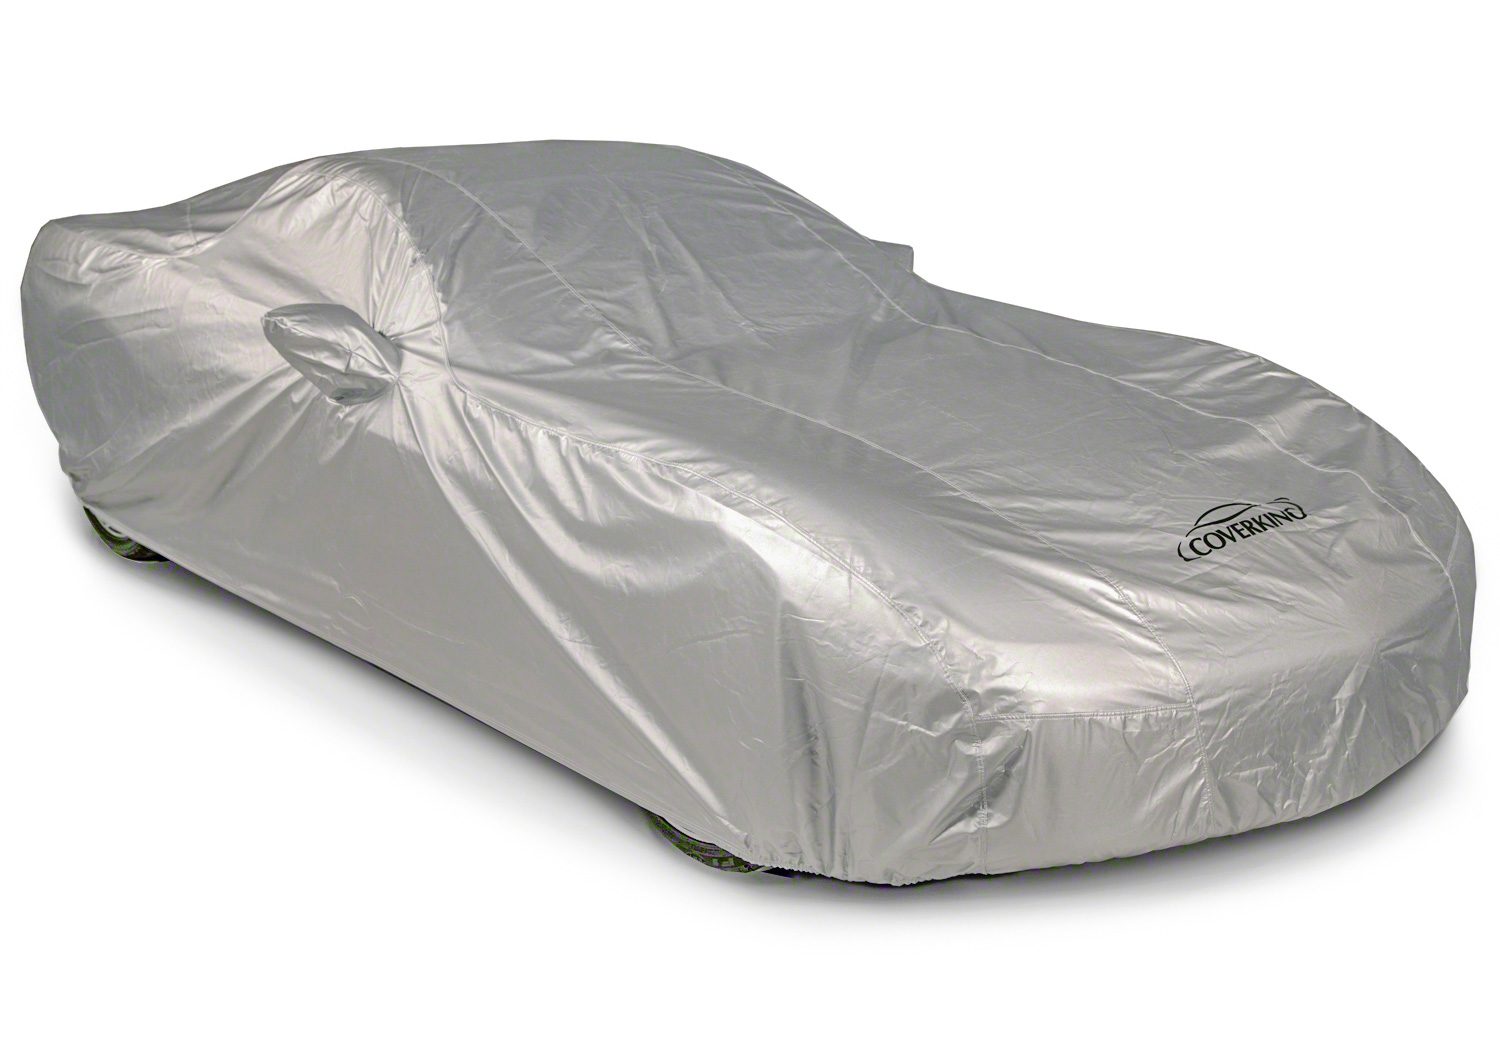 Silverguard Plus Car Cover for    